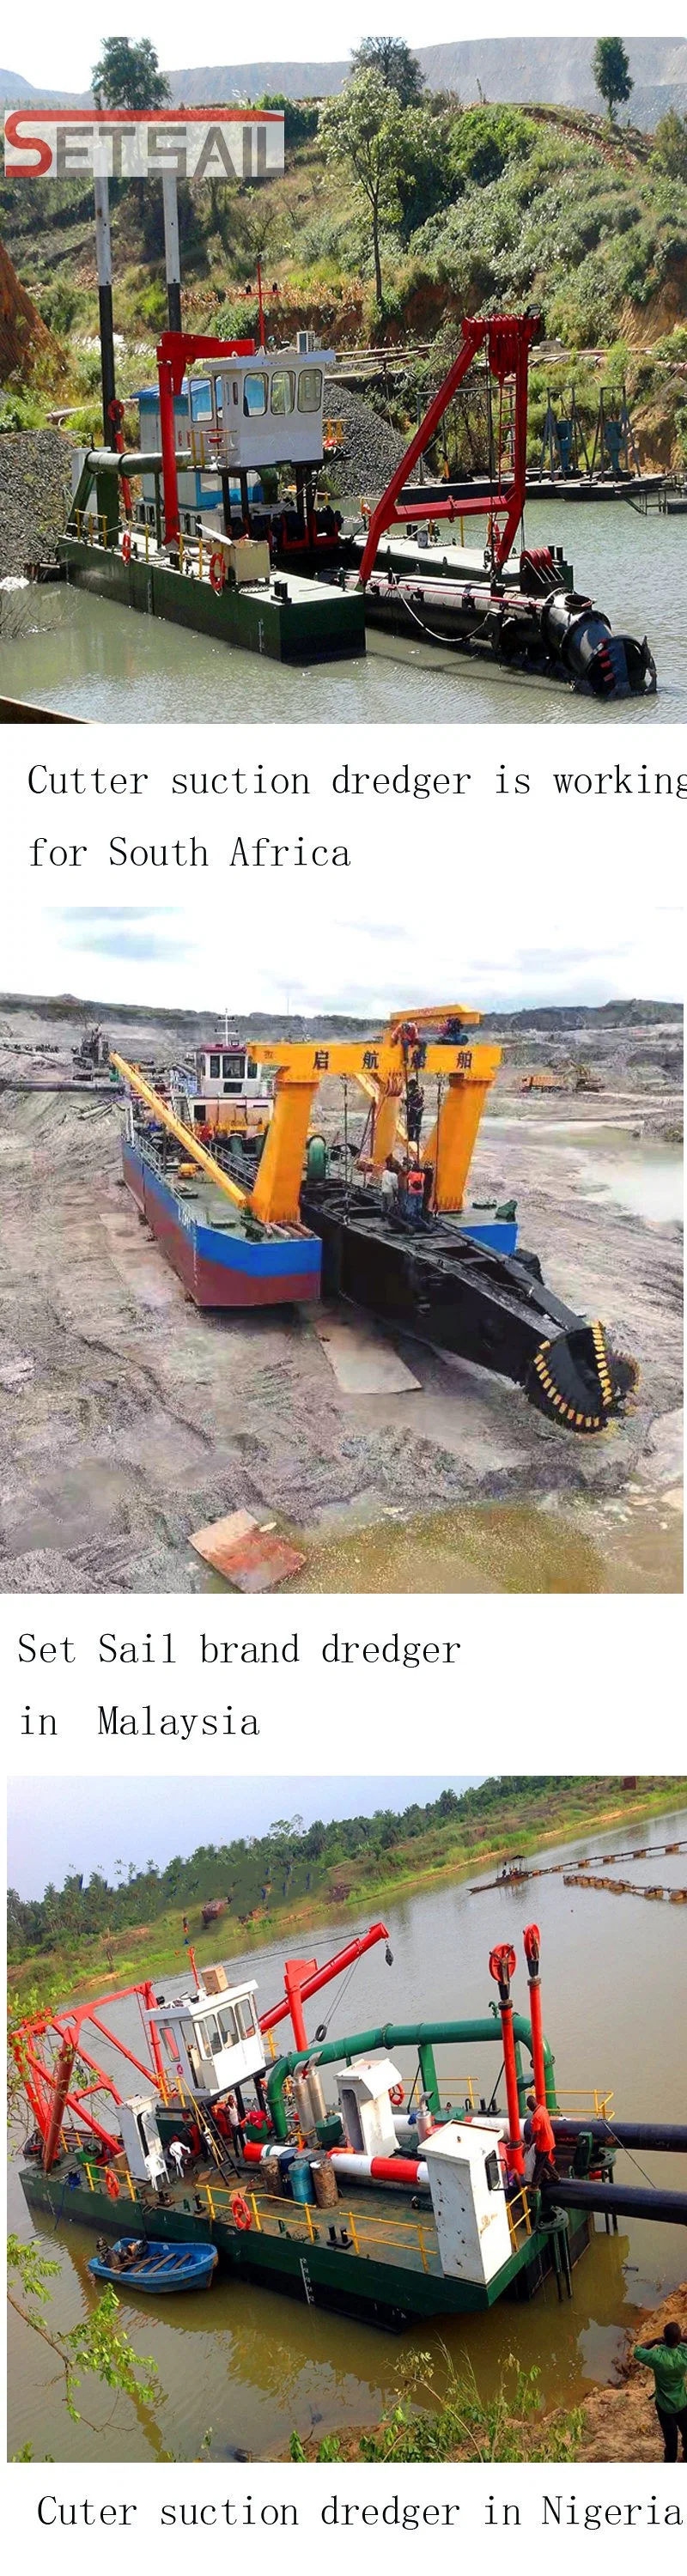 20 Inch Cutter Suction Dredger with Depth Sounder